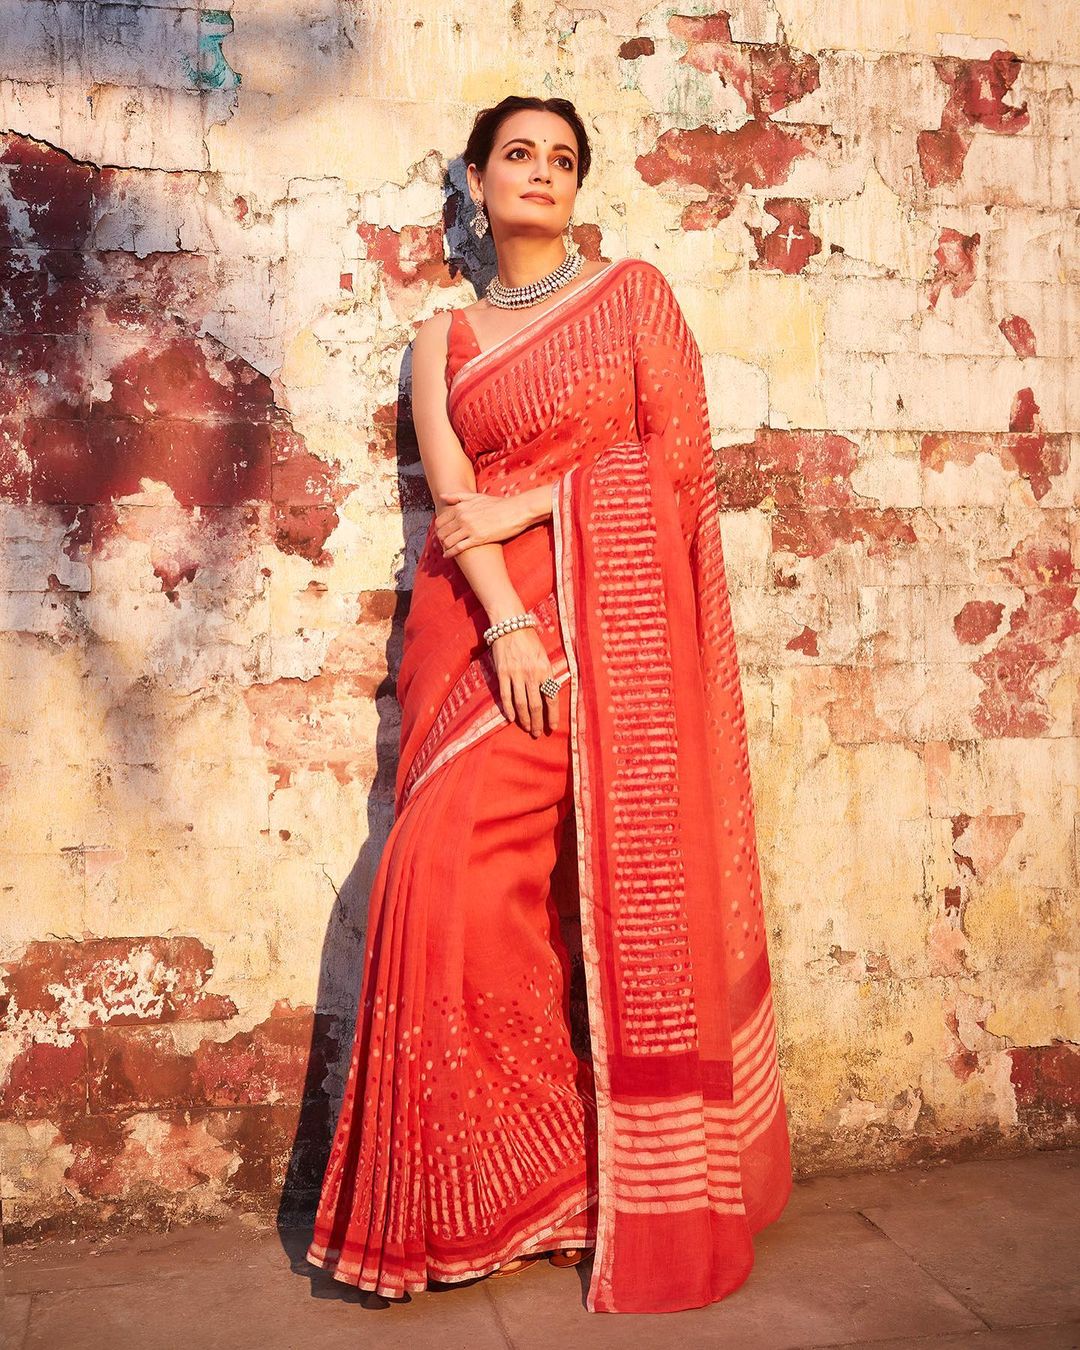 dia-mirza-steals-breaths-in-red-handcrafted-saree-as-she-promotes-bheed